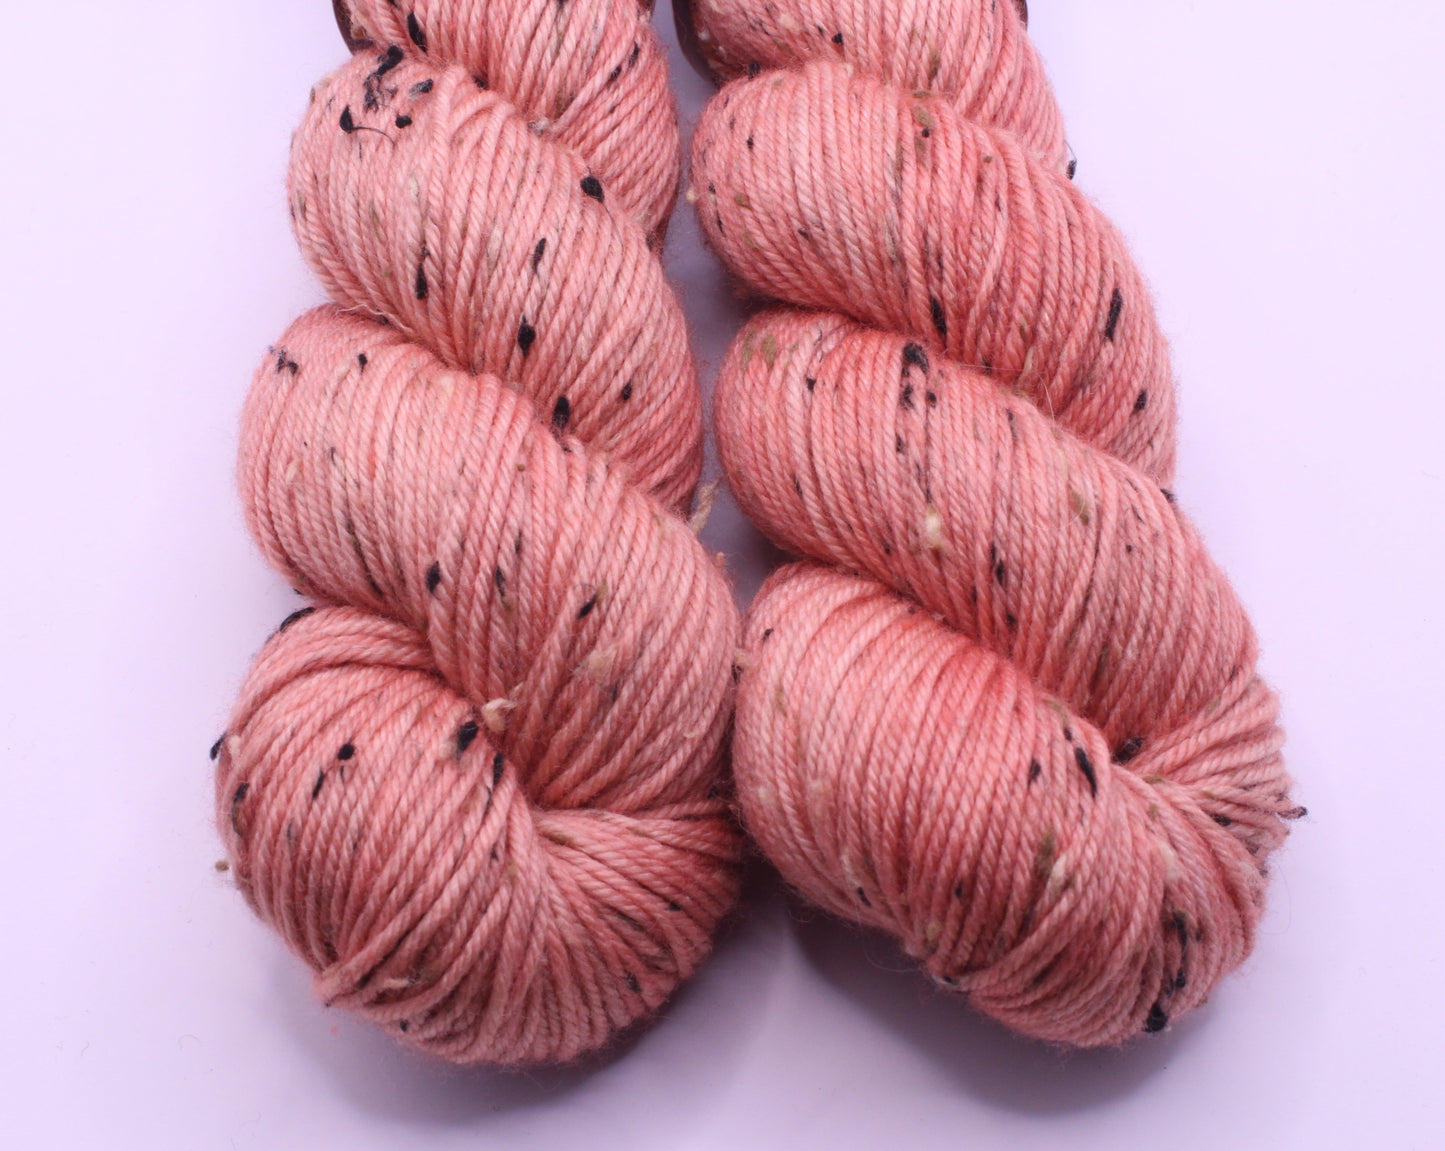 DK Tweed - Your Initials Spell B.E.D? #1 - The Blanche Collection